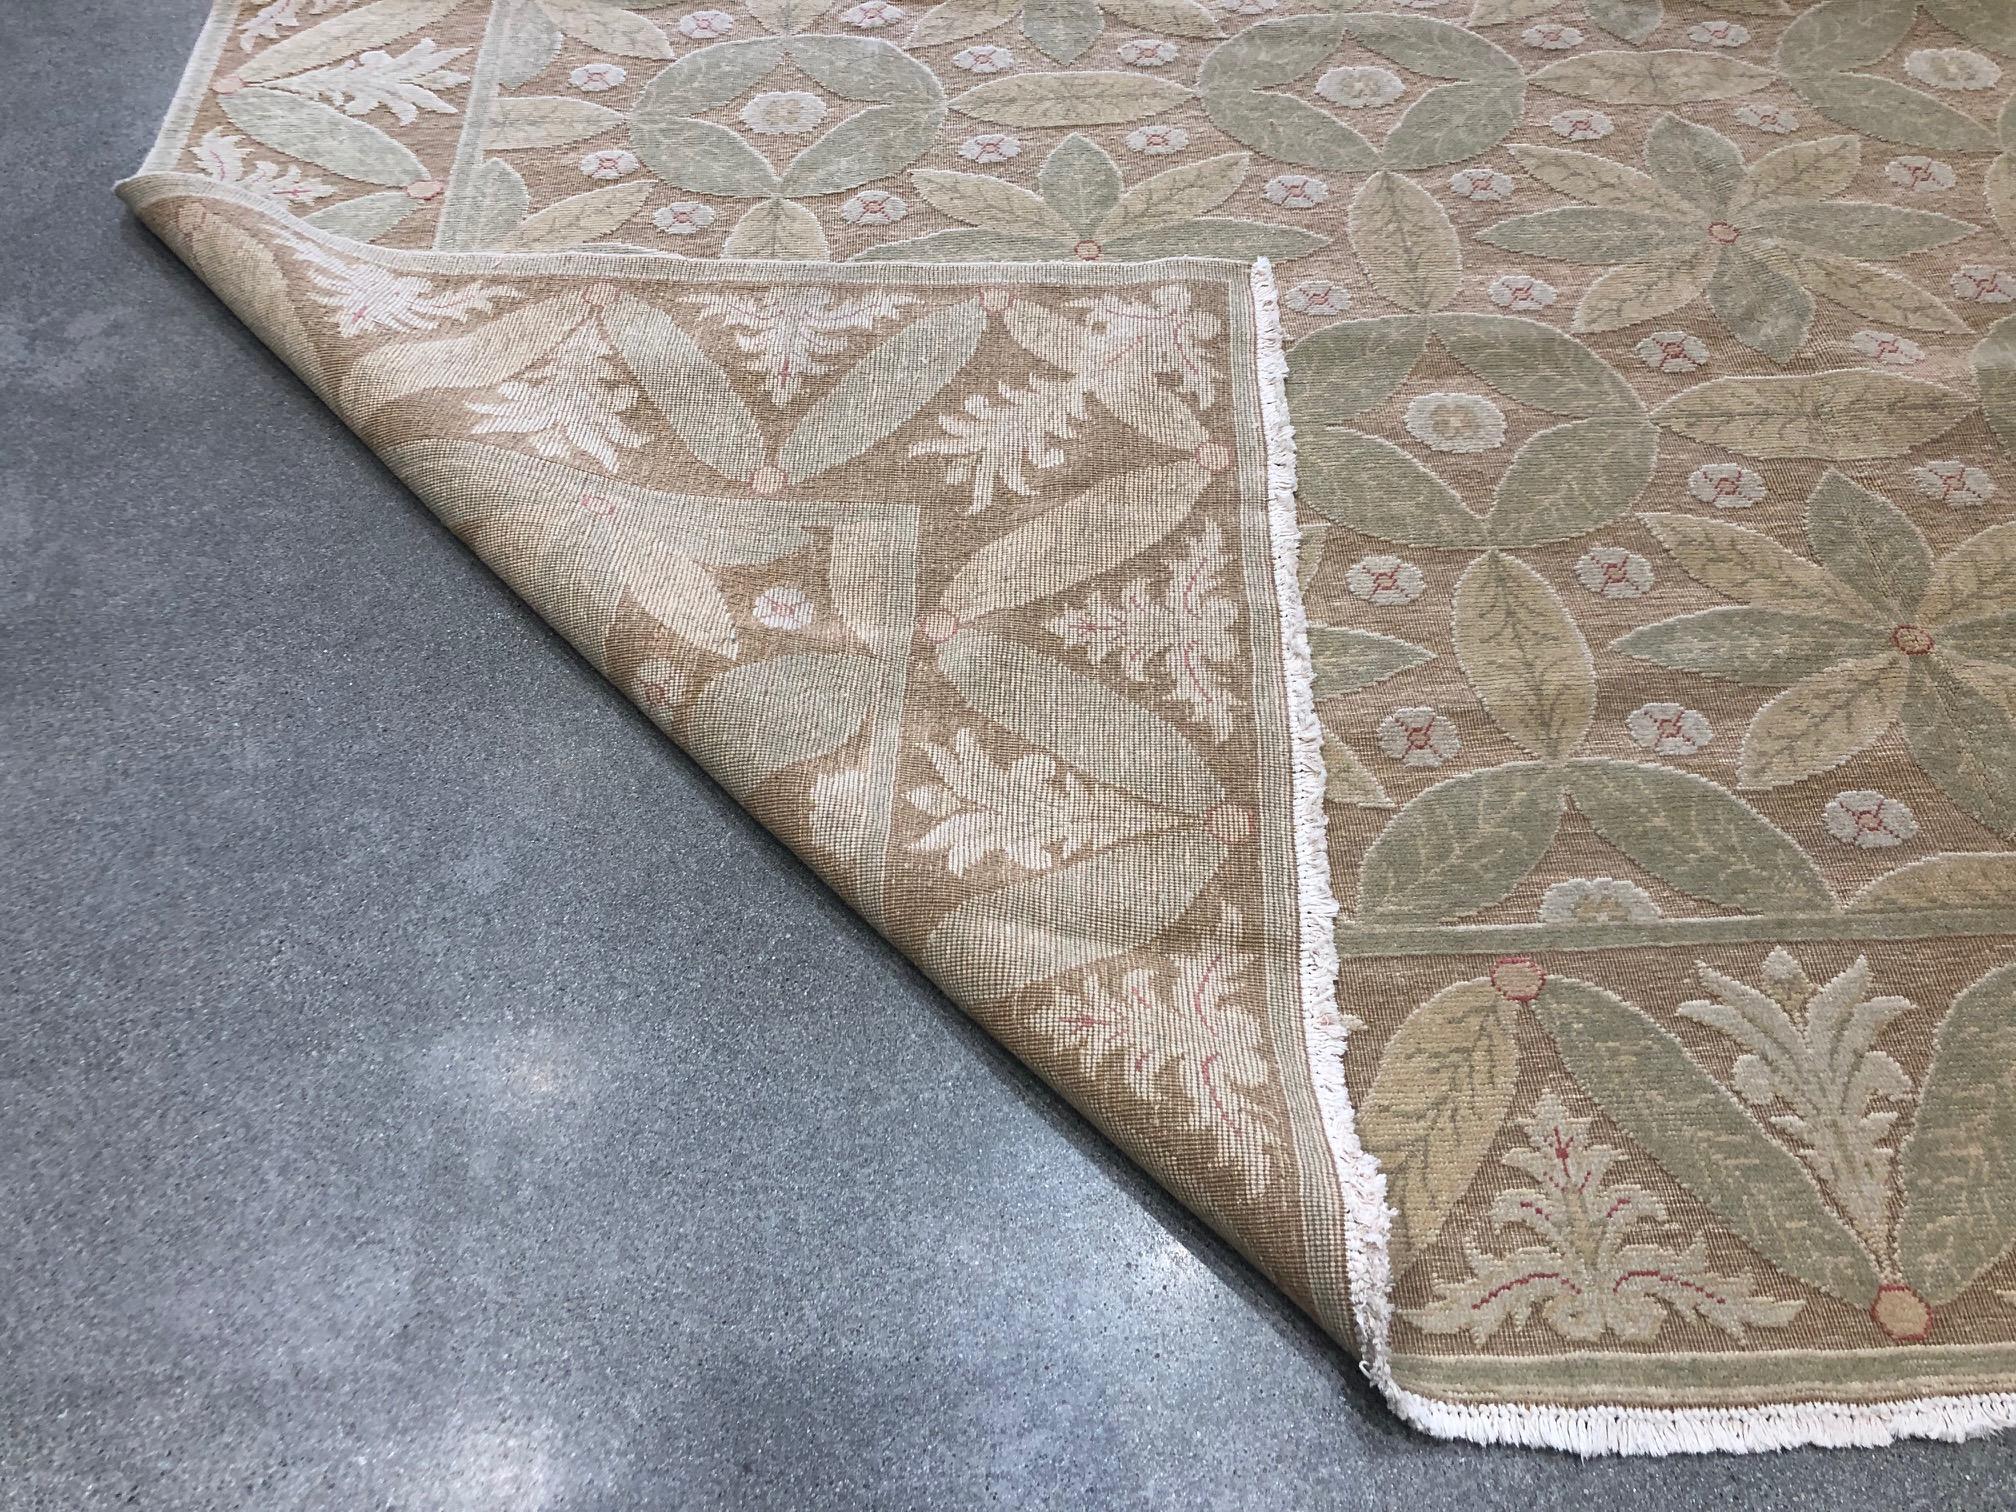 Leaves of green and yellow have been artfully arranged to give a lightly tropical feel to a durable wool area rug. Small cream blossoms burst from the spaces in between to add to the multi-dimensional look. Handmade in Europe.